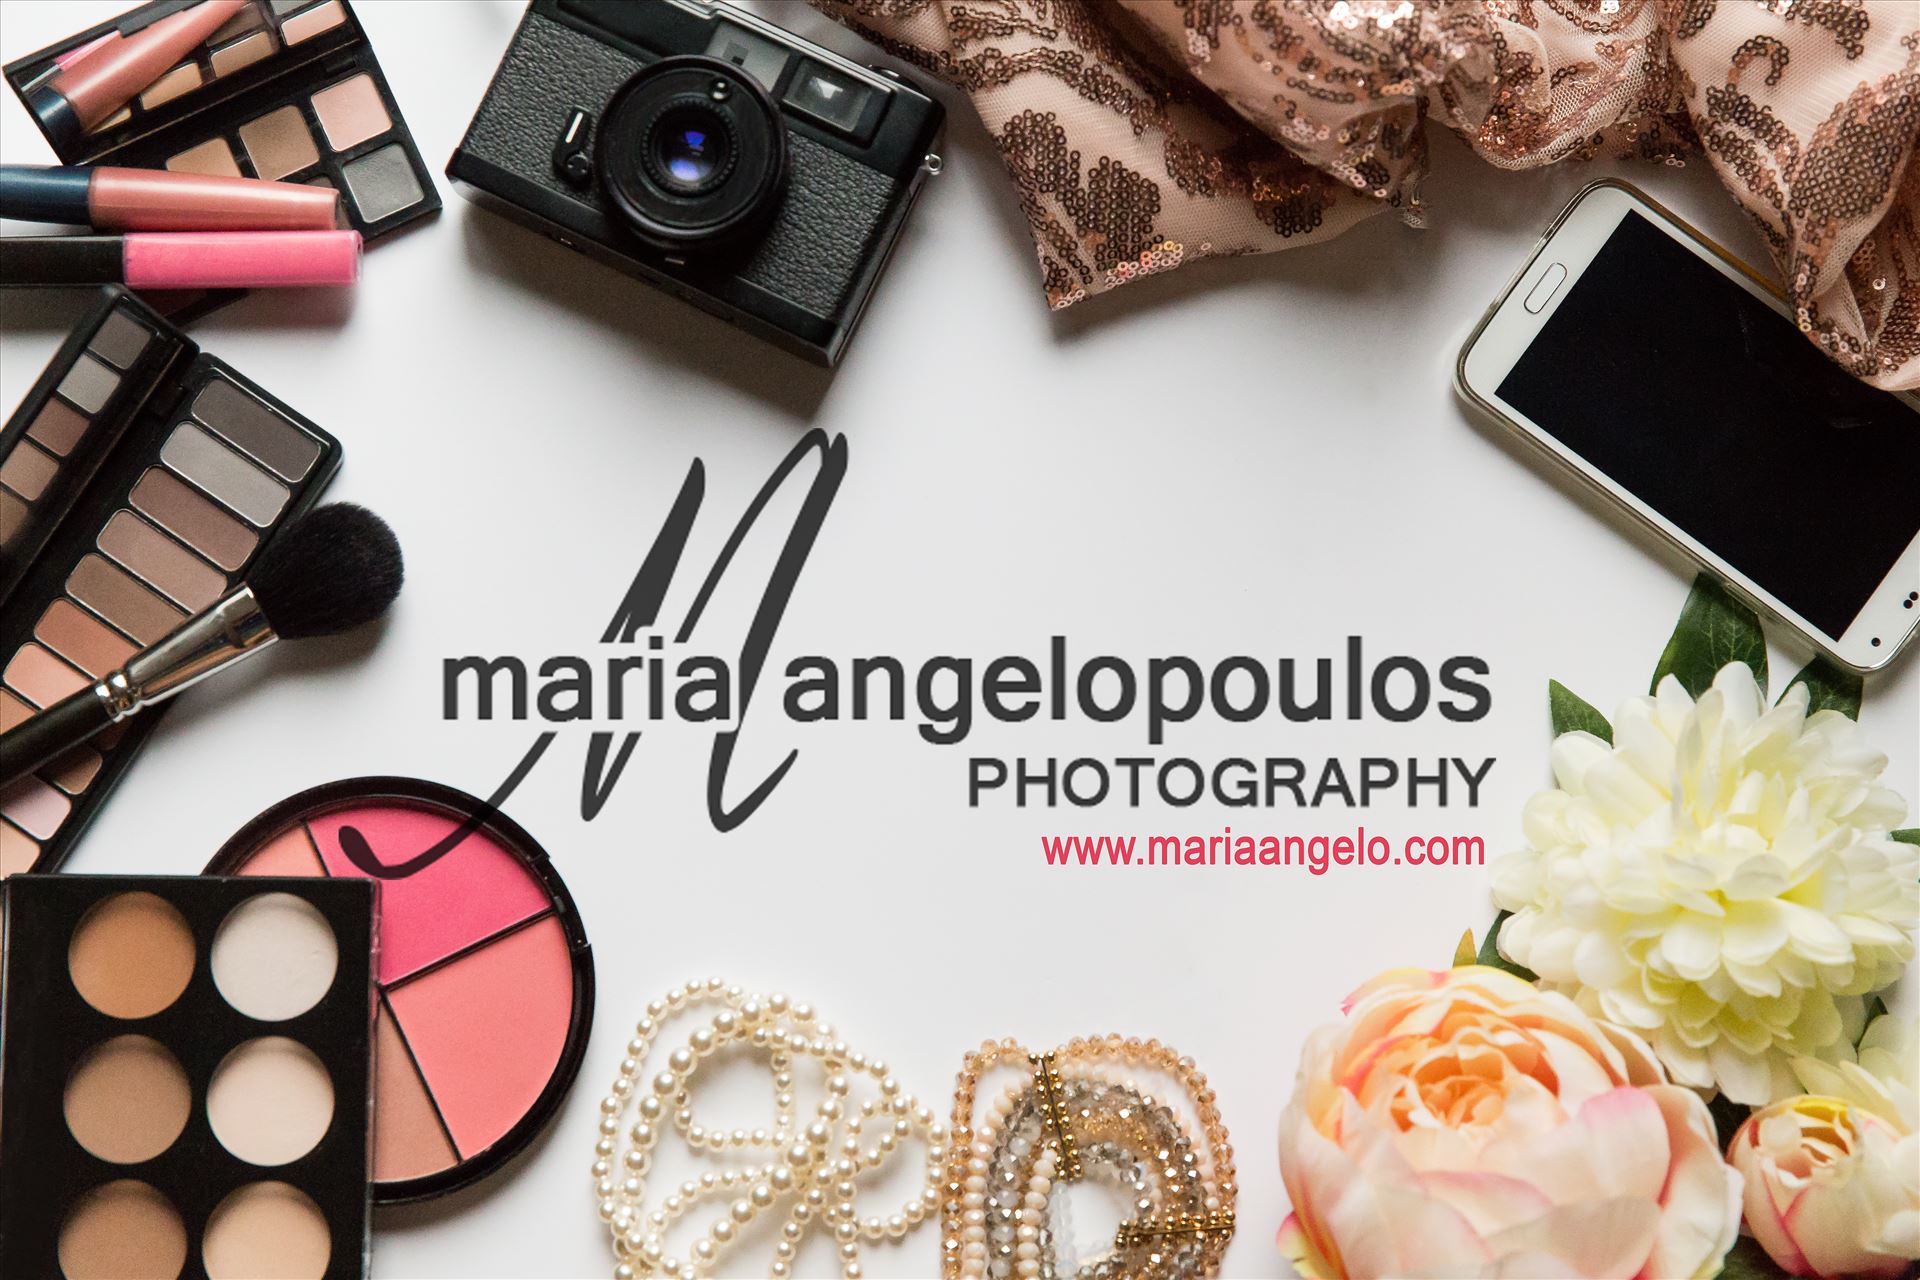 boardlogo - women's portraits, children, pets, men, photography, photographer. glamour, portrait, headshot, head shot, personal branding by Maria Angelopoulos Photogrpahy